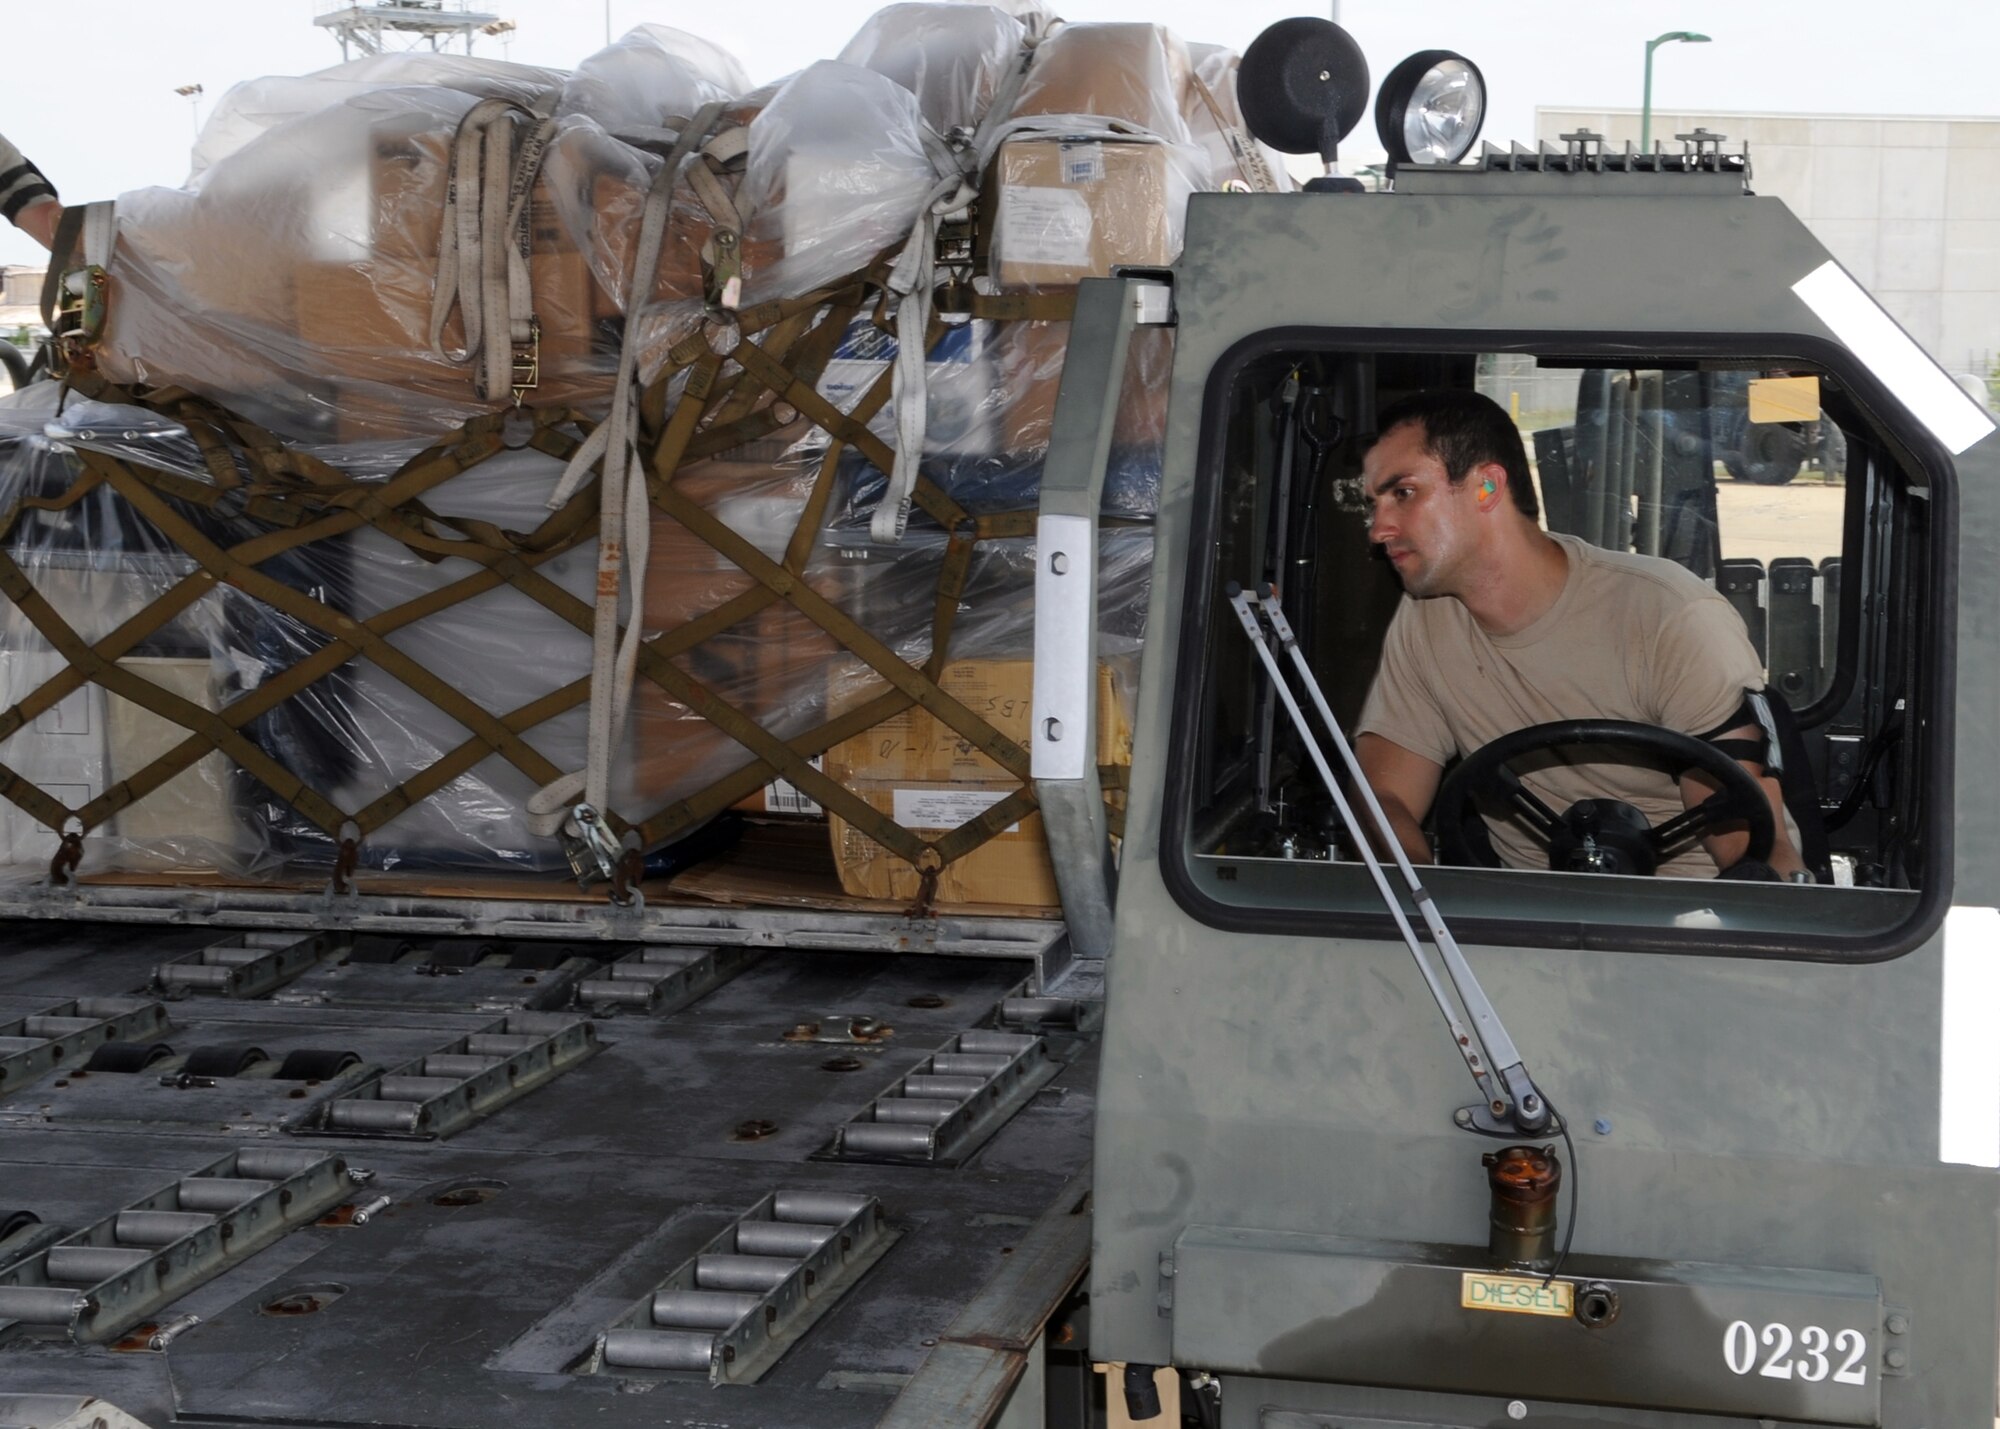 GULFPORT AIR NATIONAL GUARD BASE, Miss. – Tech. Sgt. Richard House, 81st Logistics Readiness Squadron air transportation specialist, Keesler Air Force Base, Miss., operates a Next Generation System Loader to place a pallet of medical supplies on an Altus AFB C-17 Globemaster III, June 22, 2012. Altus AFB picked up medical supplies at the Gulfport ANG, then delivered them to Haiti for Operation Ukraine, the organization that donated the supplies. (U.S. Air Force photo by Airman 1st Class Franklin R. Ramos / 97th Air Mobility Wing / Released)